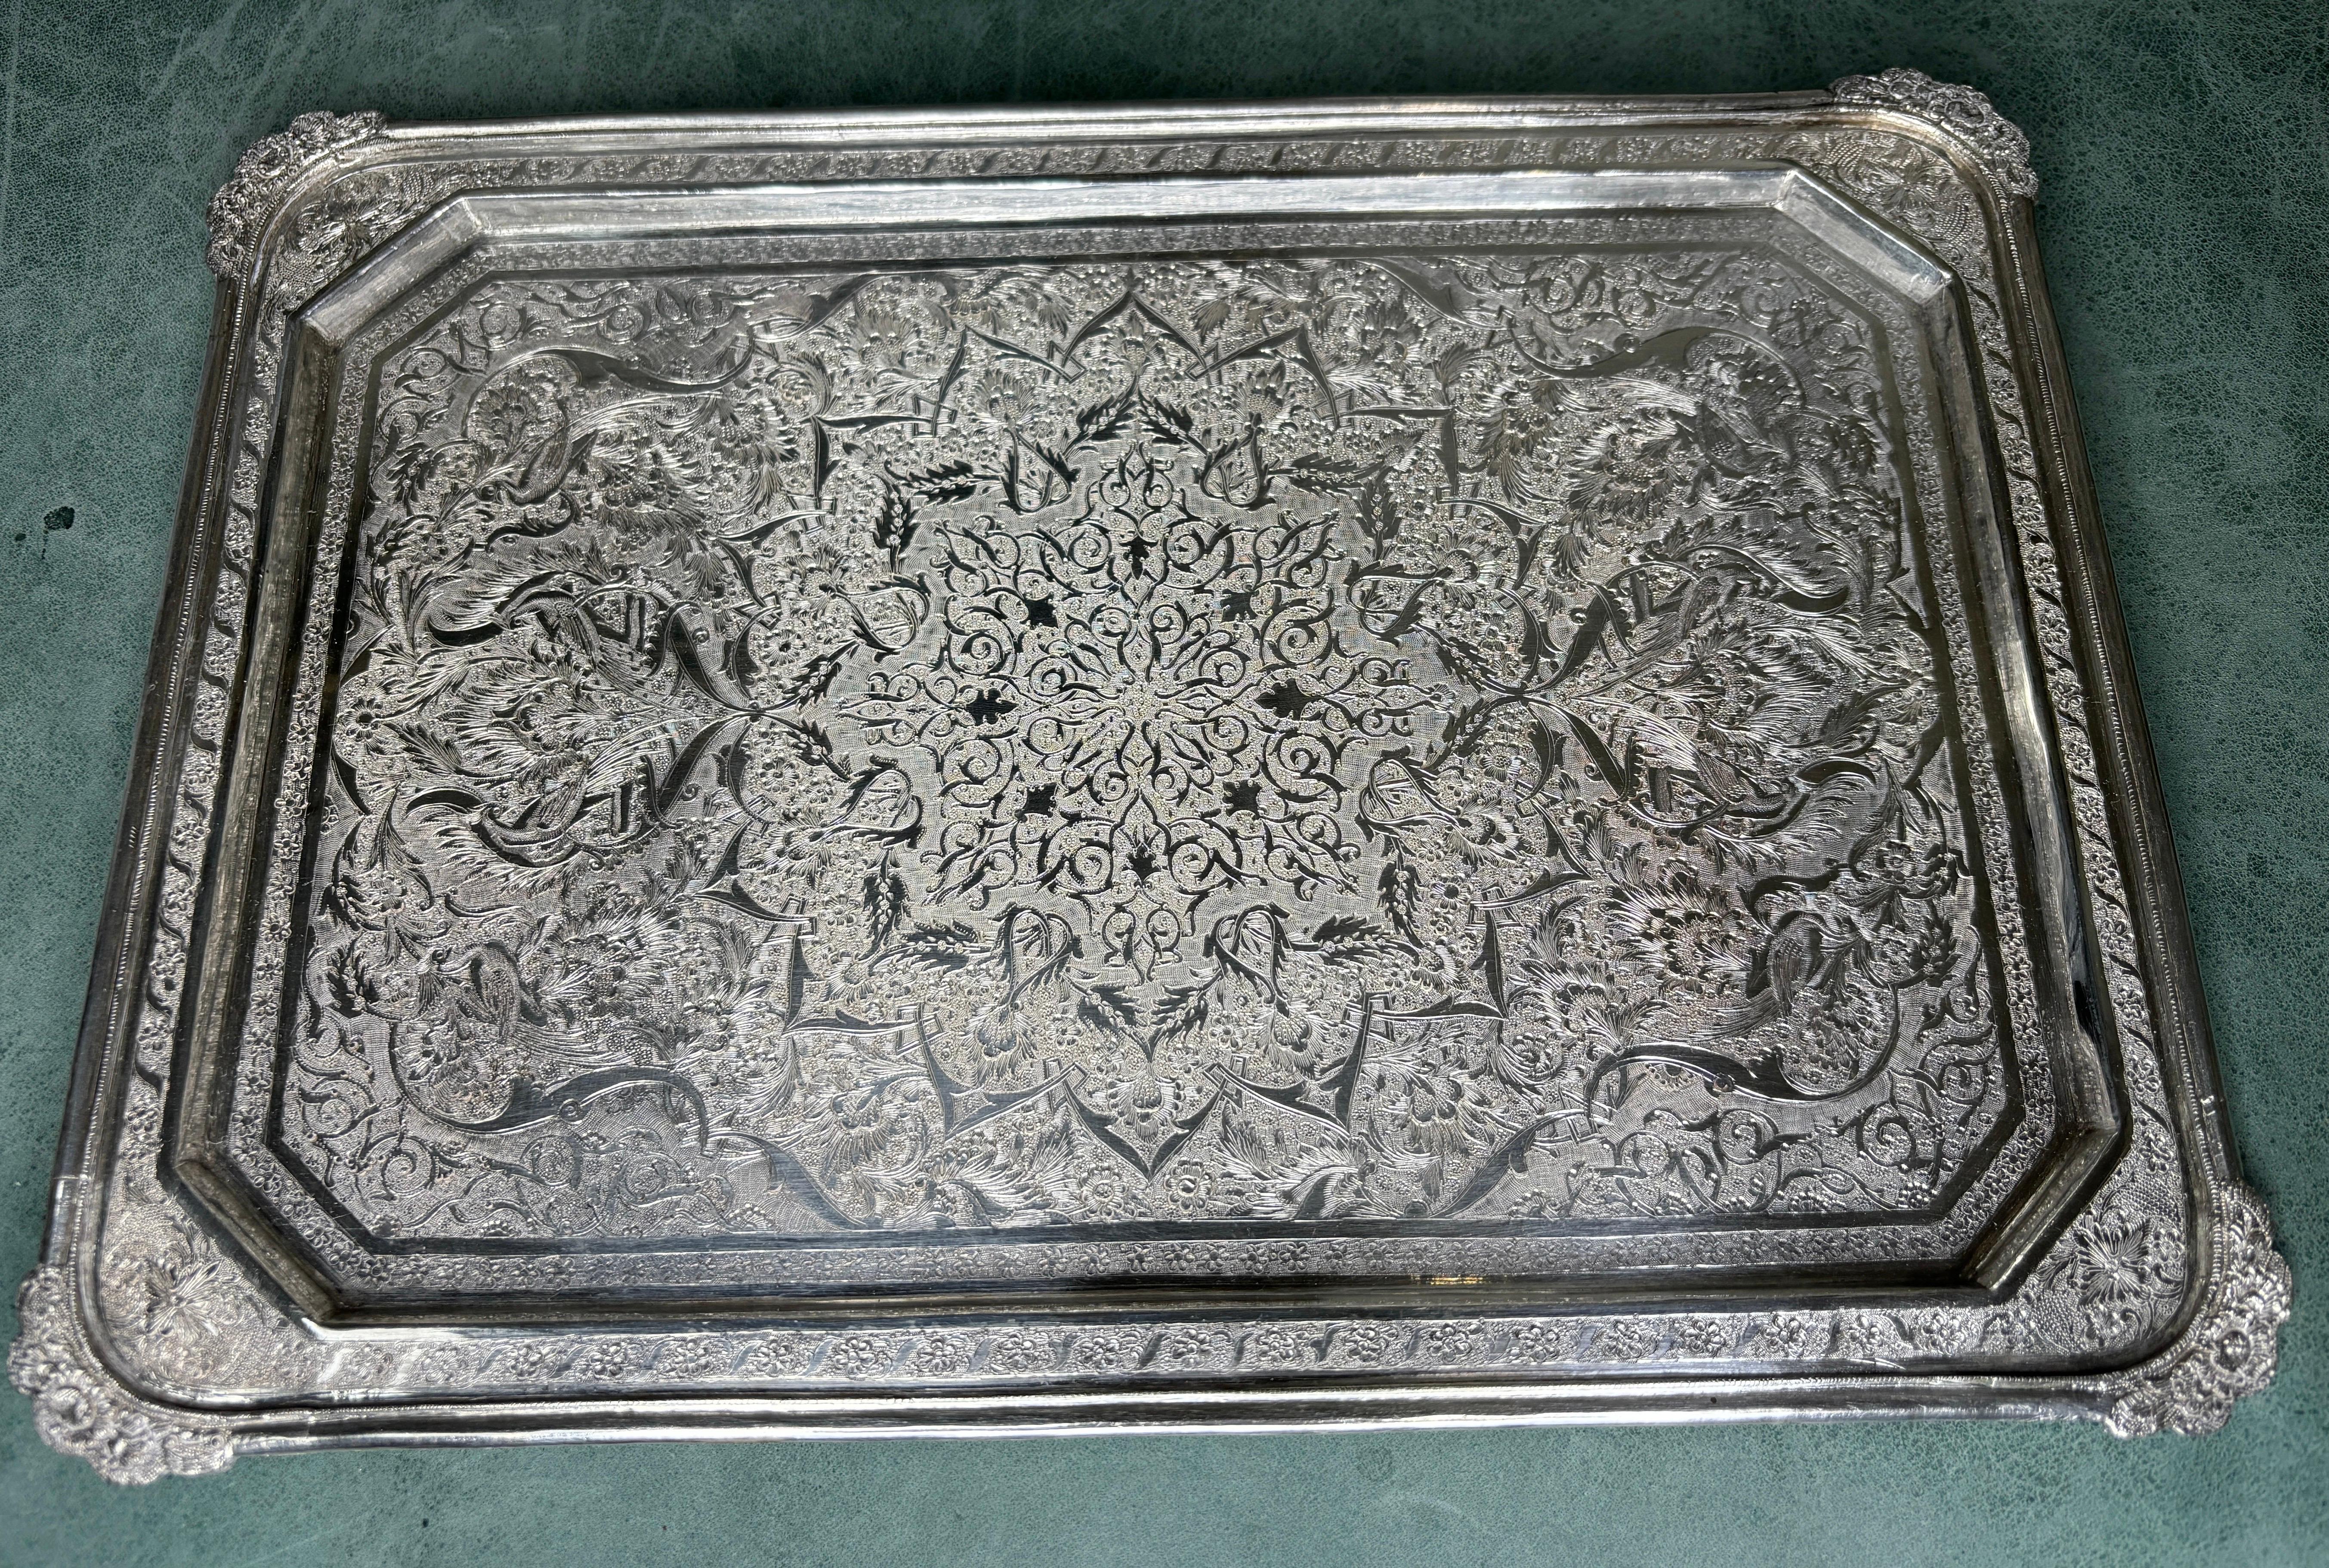 Persian silver tray with rounded corners.  Imbued with intricate craftsmanship and adorned with delicate bird and foliate patterns, this silver tray is a masterpiece that will elevate your silver collection to new heights. 

Its gleaming surface